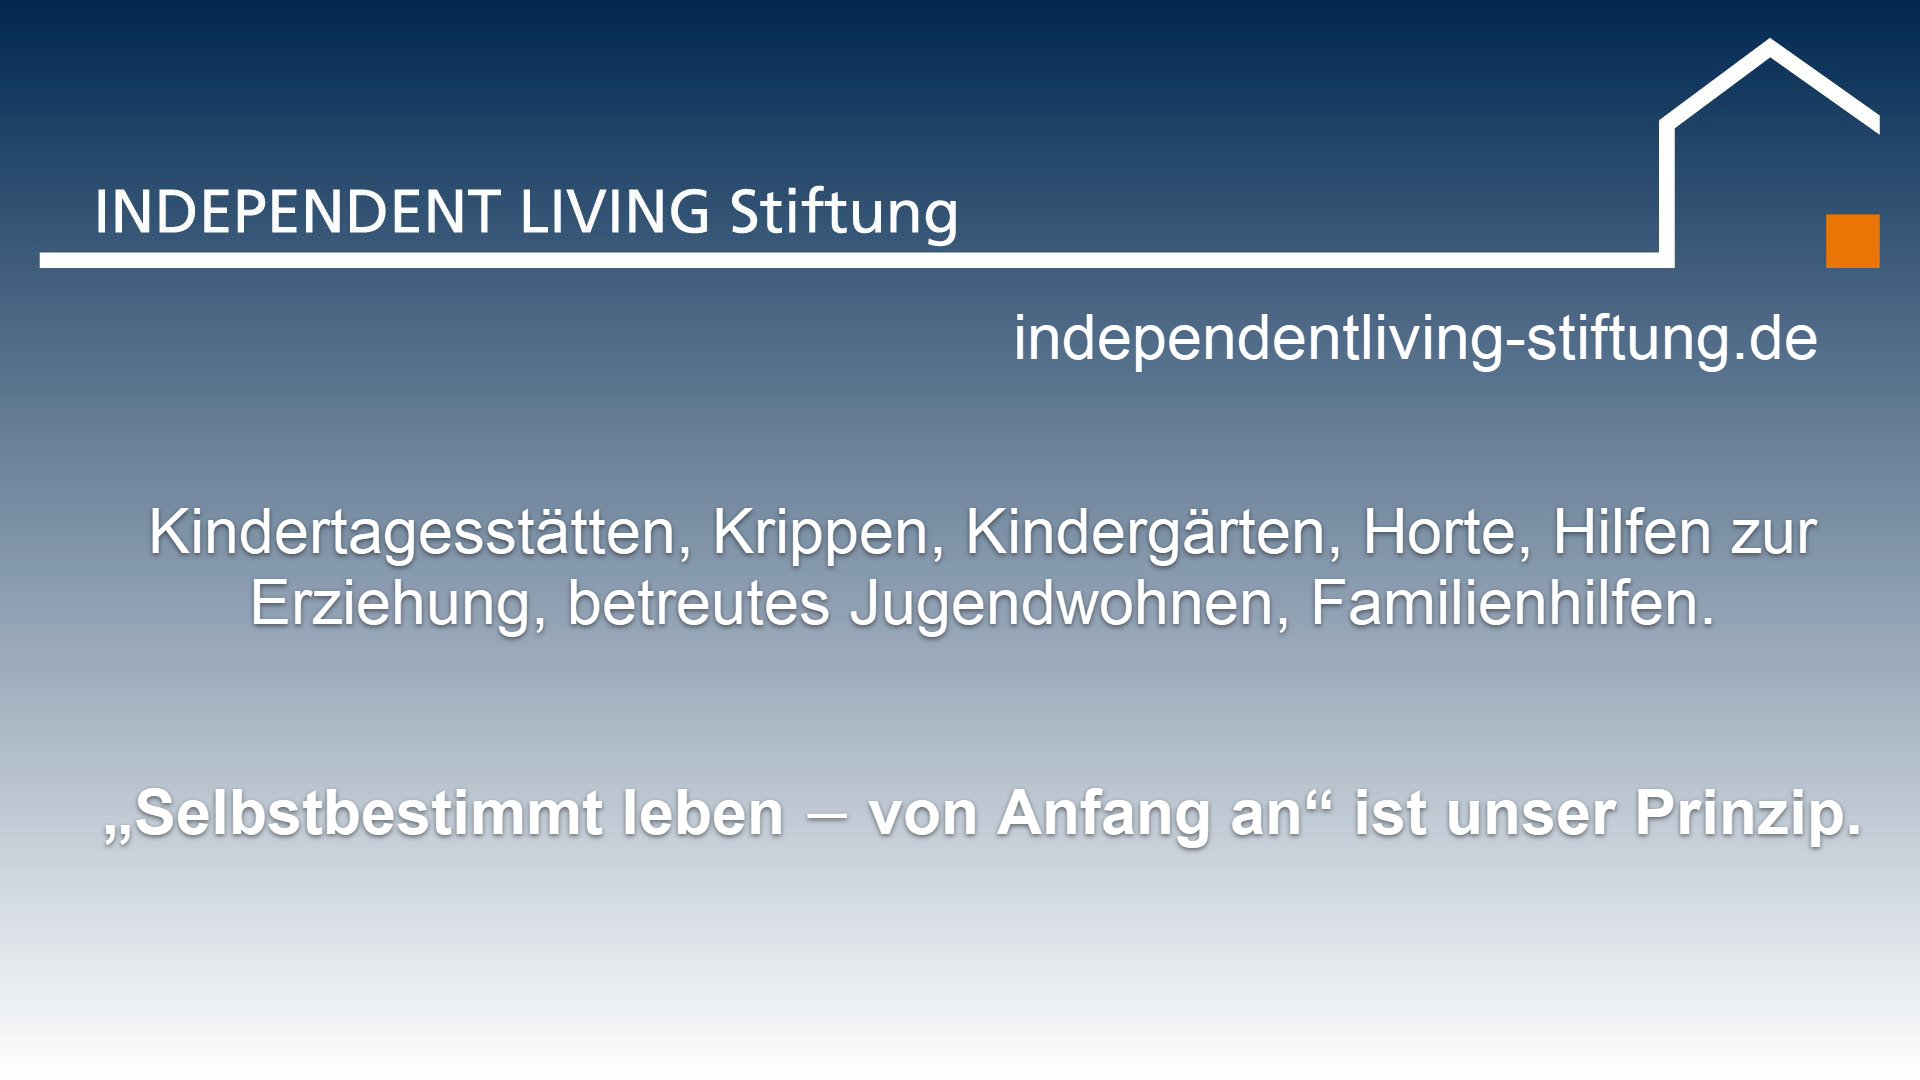 INDEPENDENT LIVING Stiftung